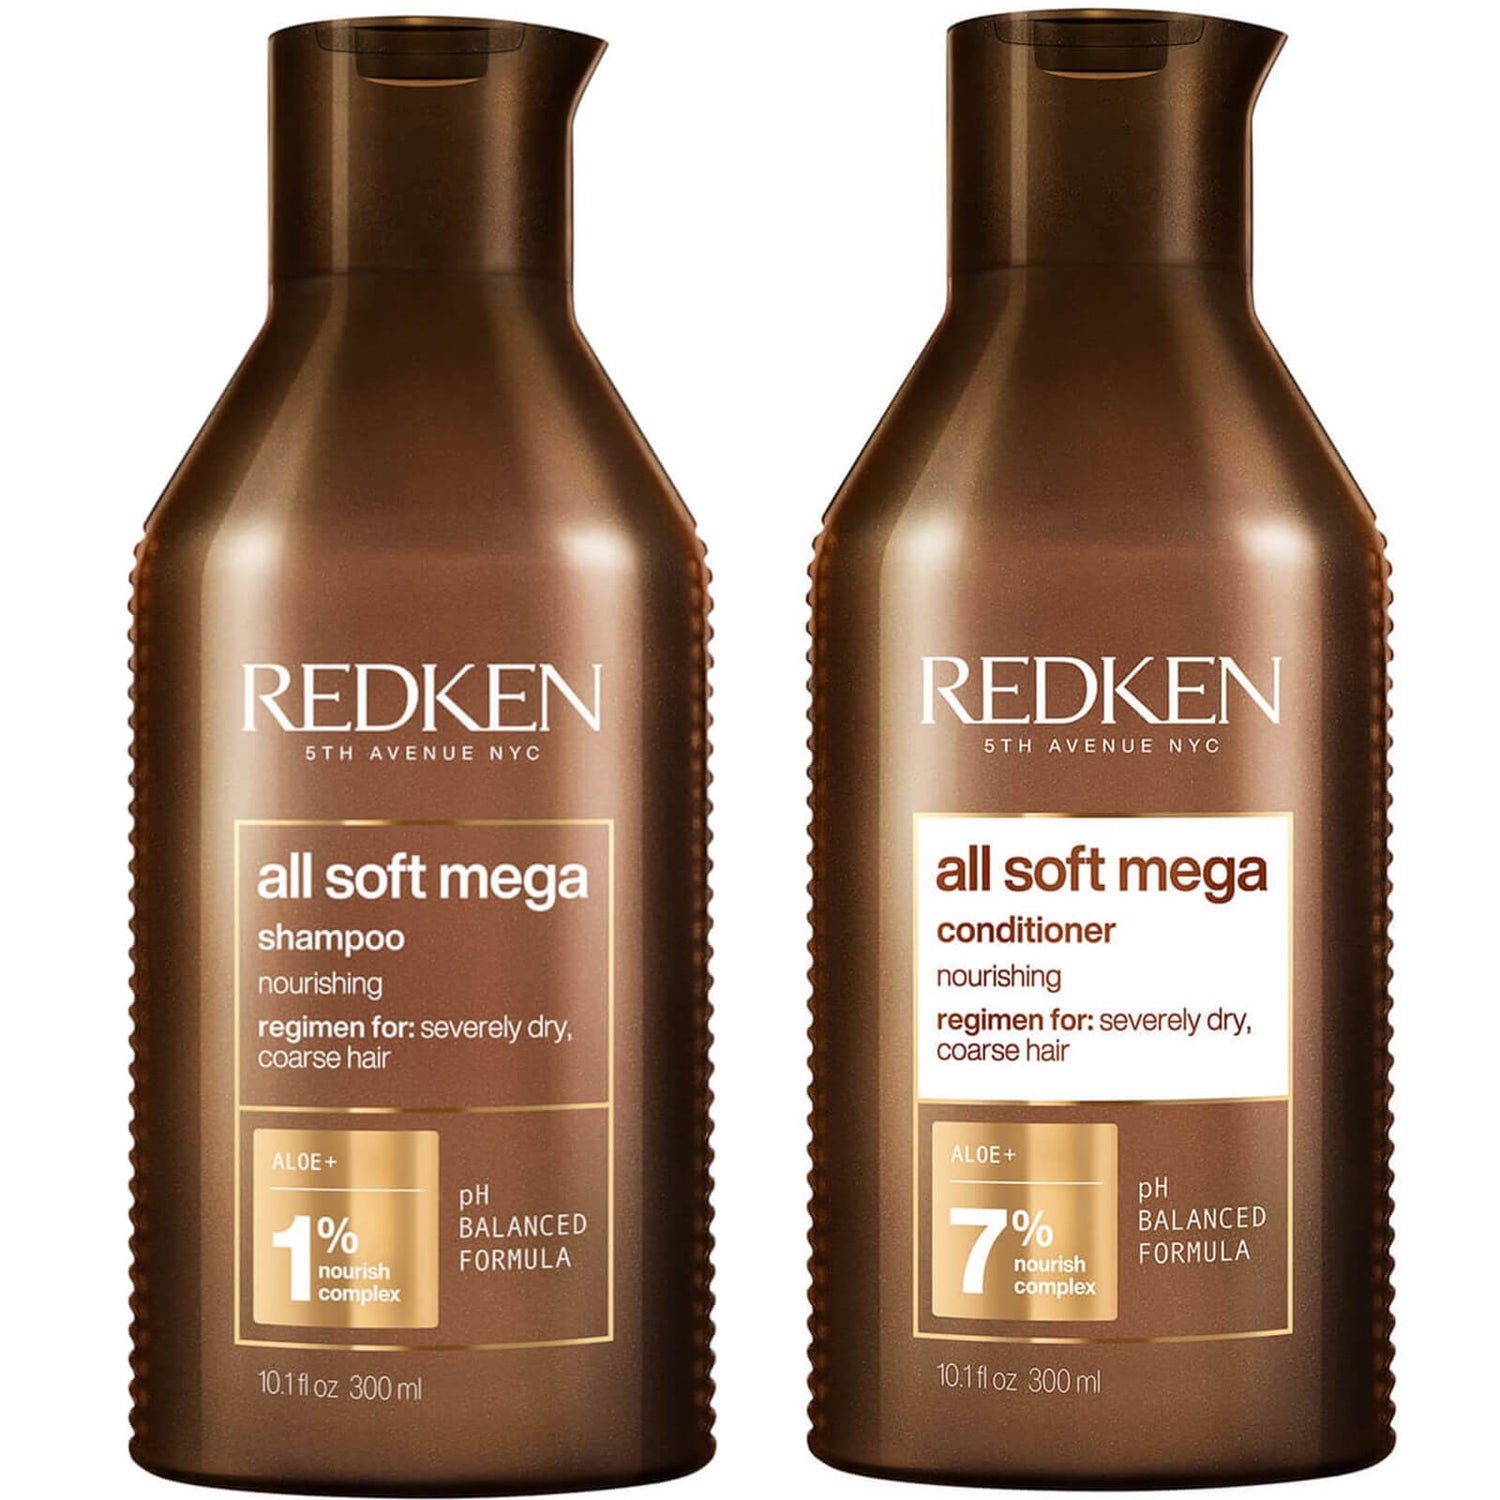 Redken All Soft Mega Shampoo and Conditioner Duo (2 x 300ml) | Buy Online |  Mankind